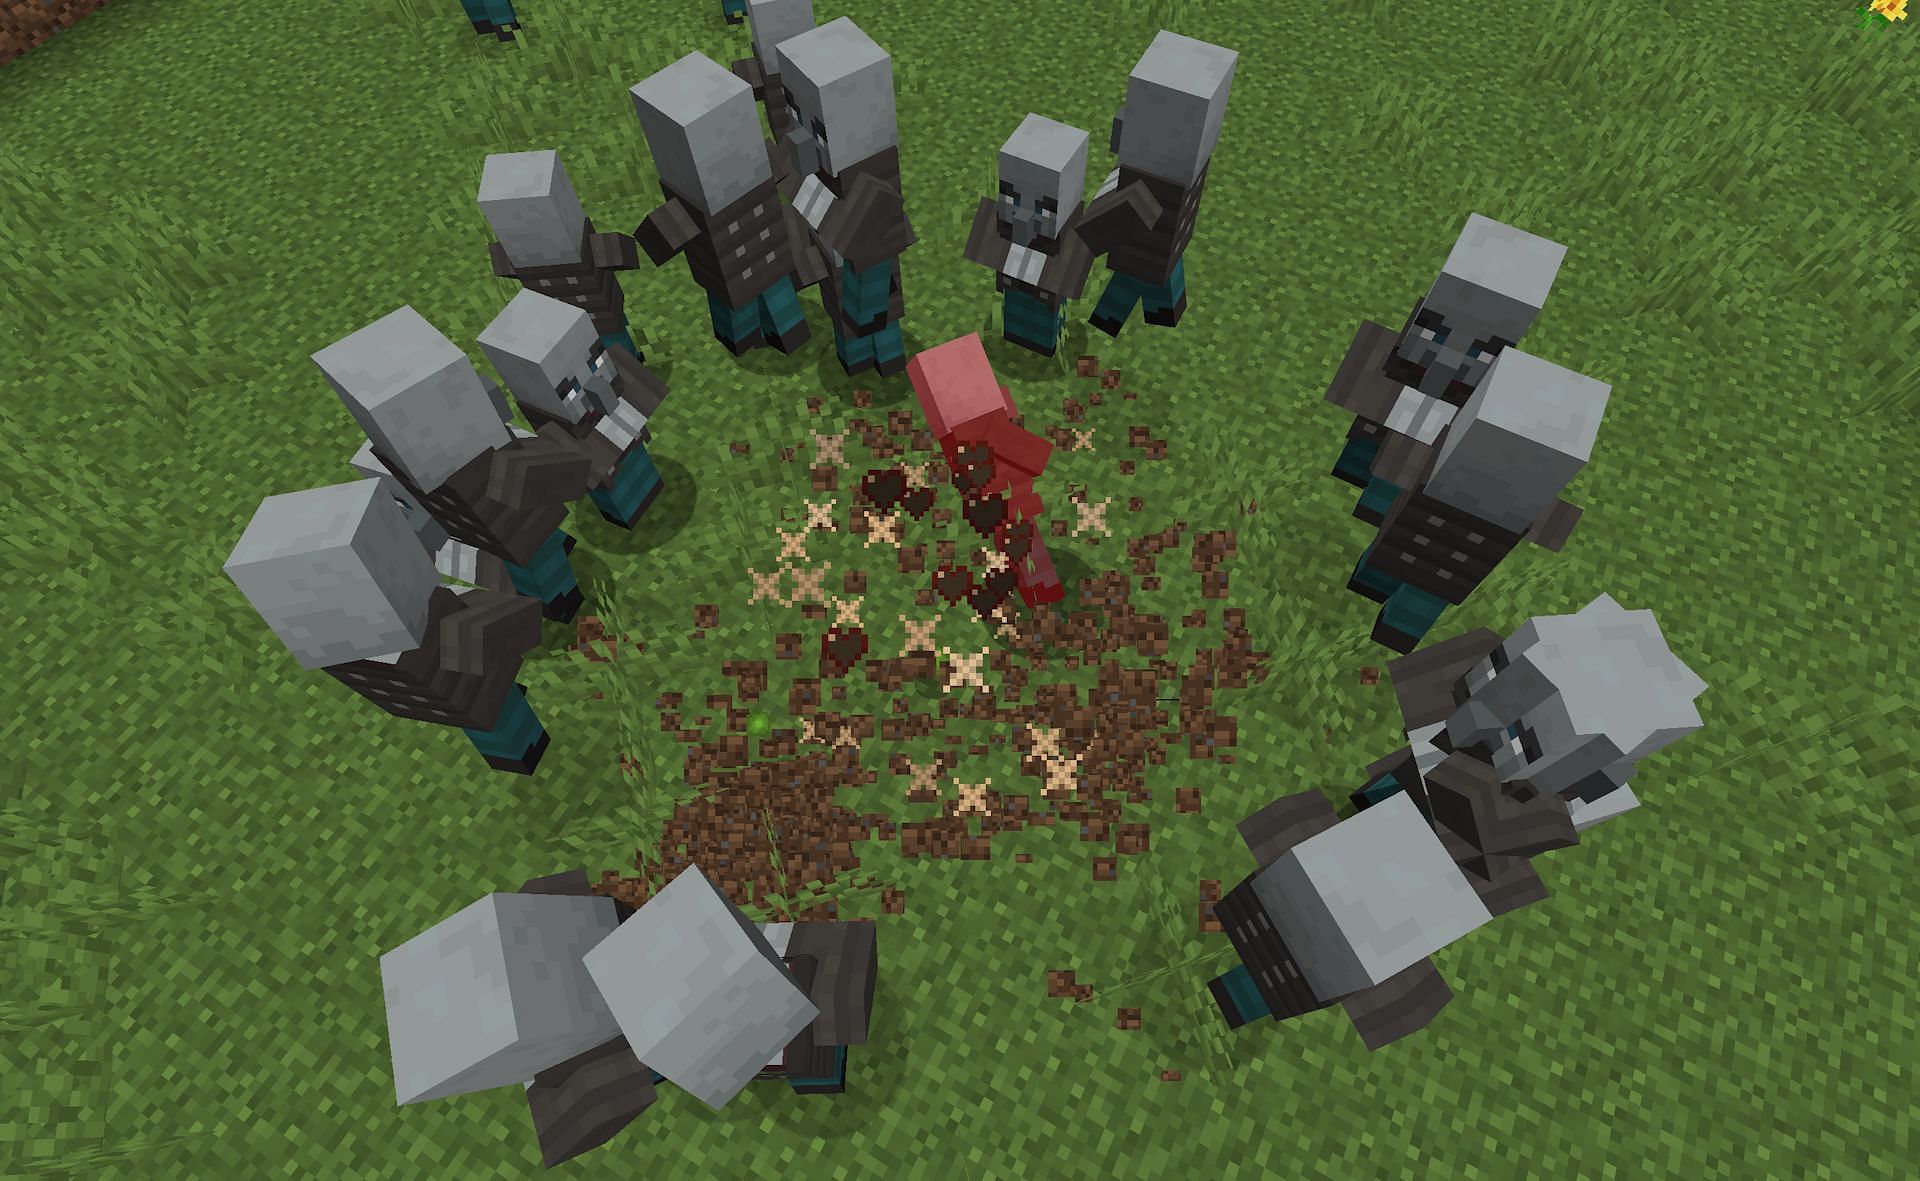 The mace also has a powerful AOE knockback effect, on top of everything else (Image via Mojang)